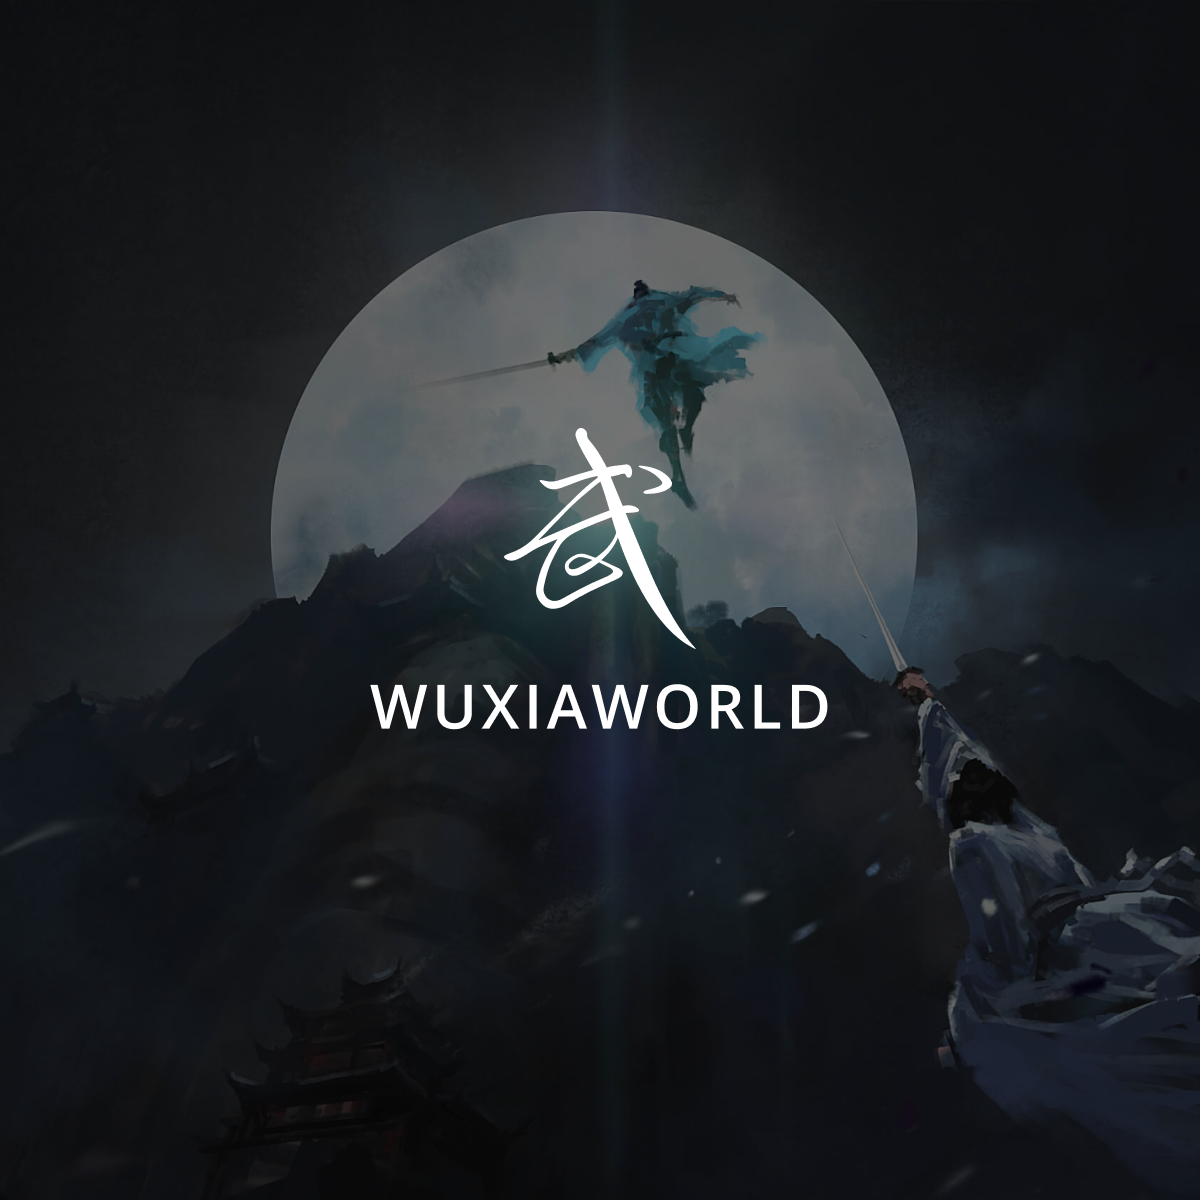 https www.wuxiaworld.co insanely pampered